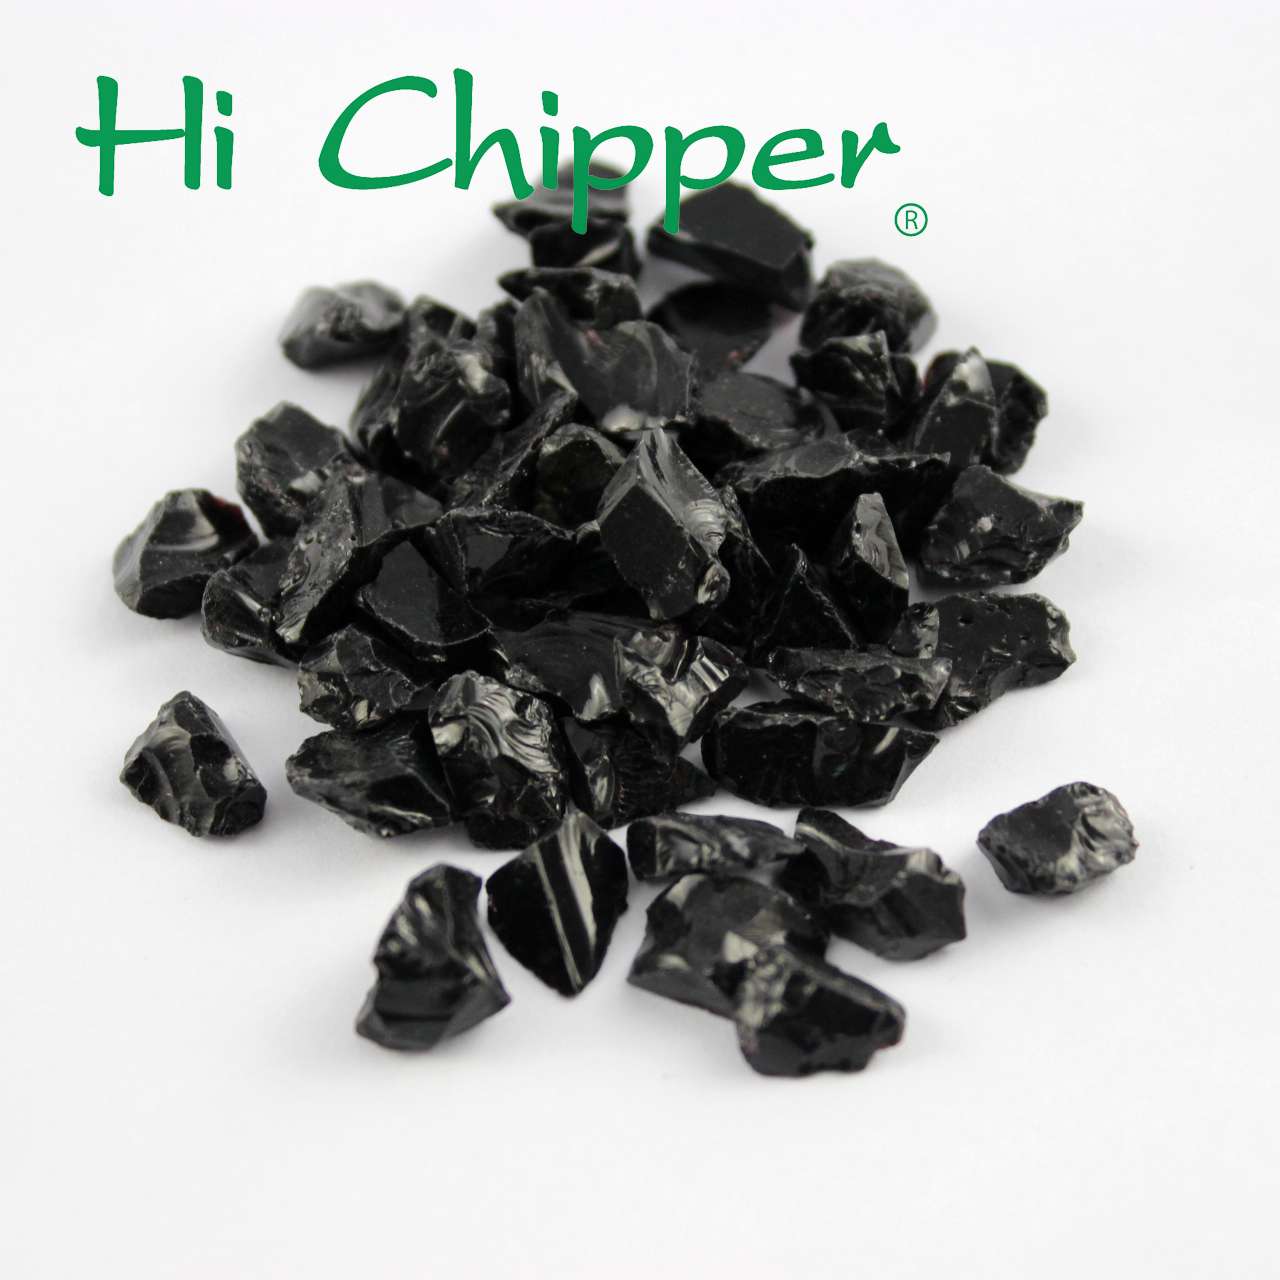 Crushed Colored Glass Dark Green Glass Chips